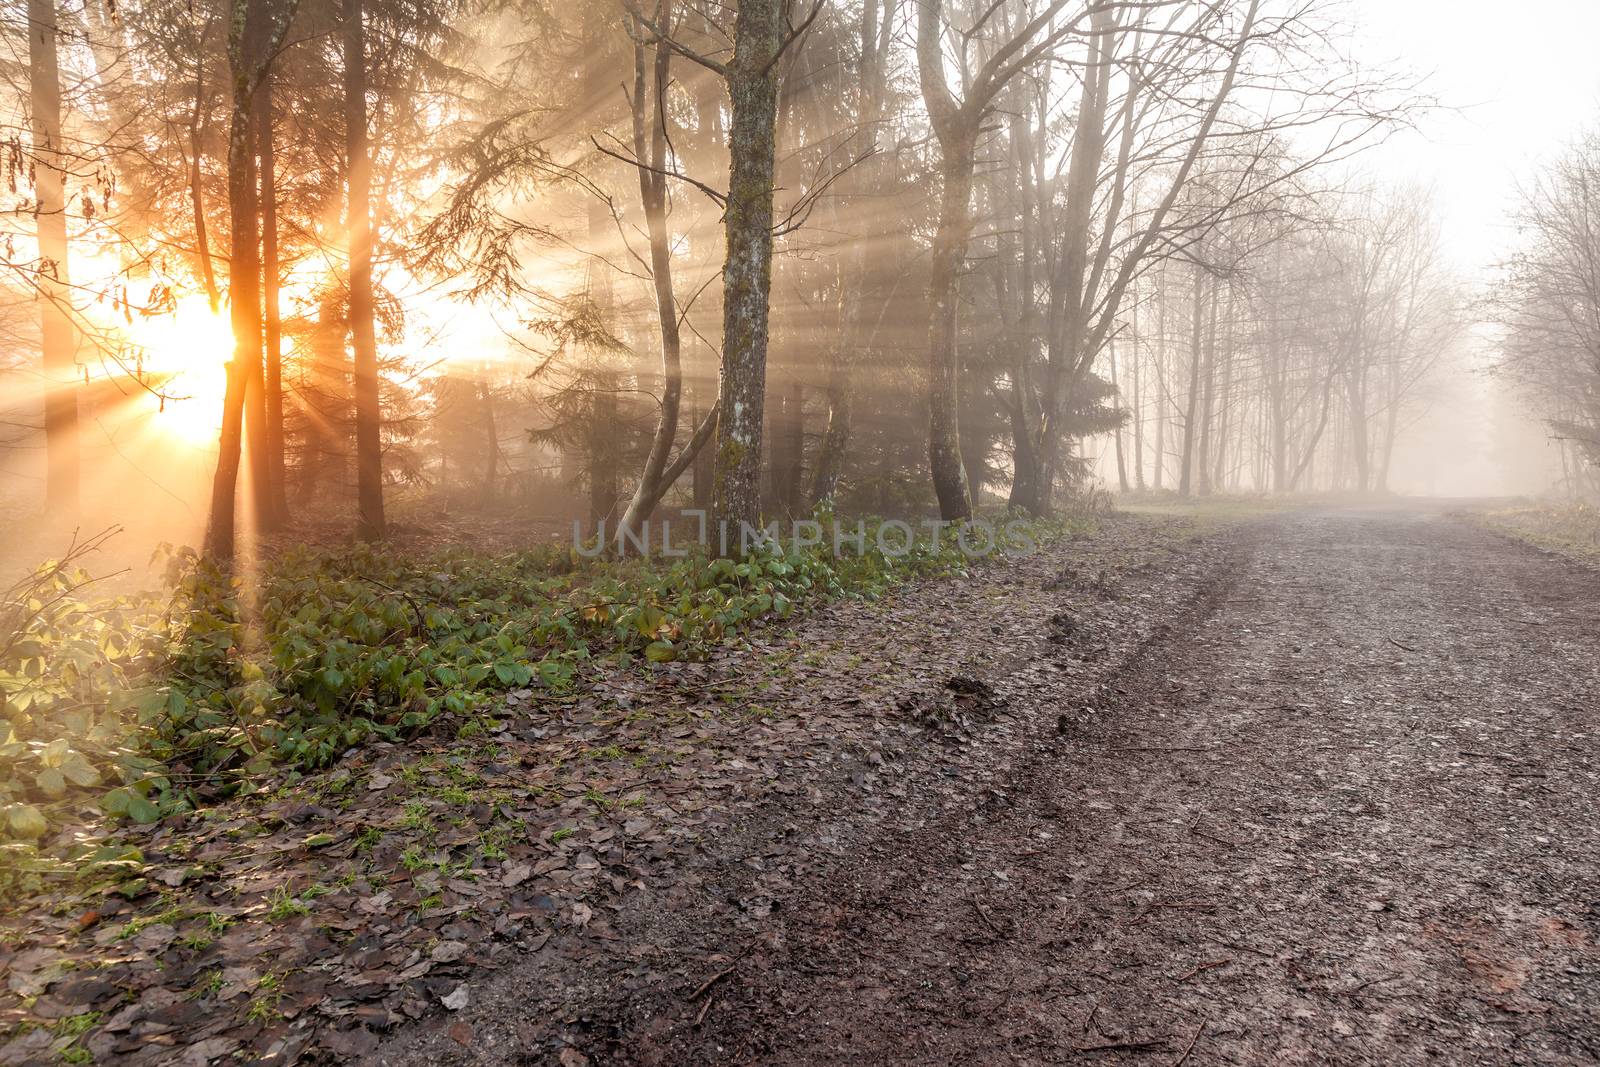 An image of an autumn forest mist with sunlight rays